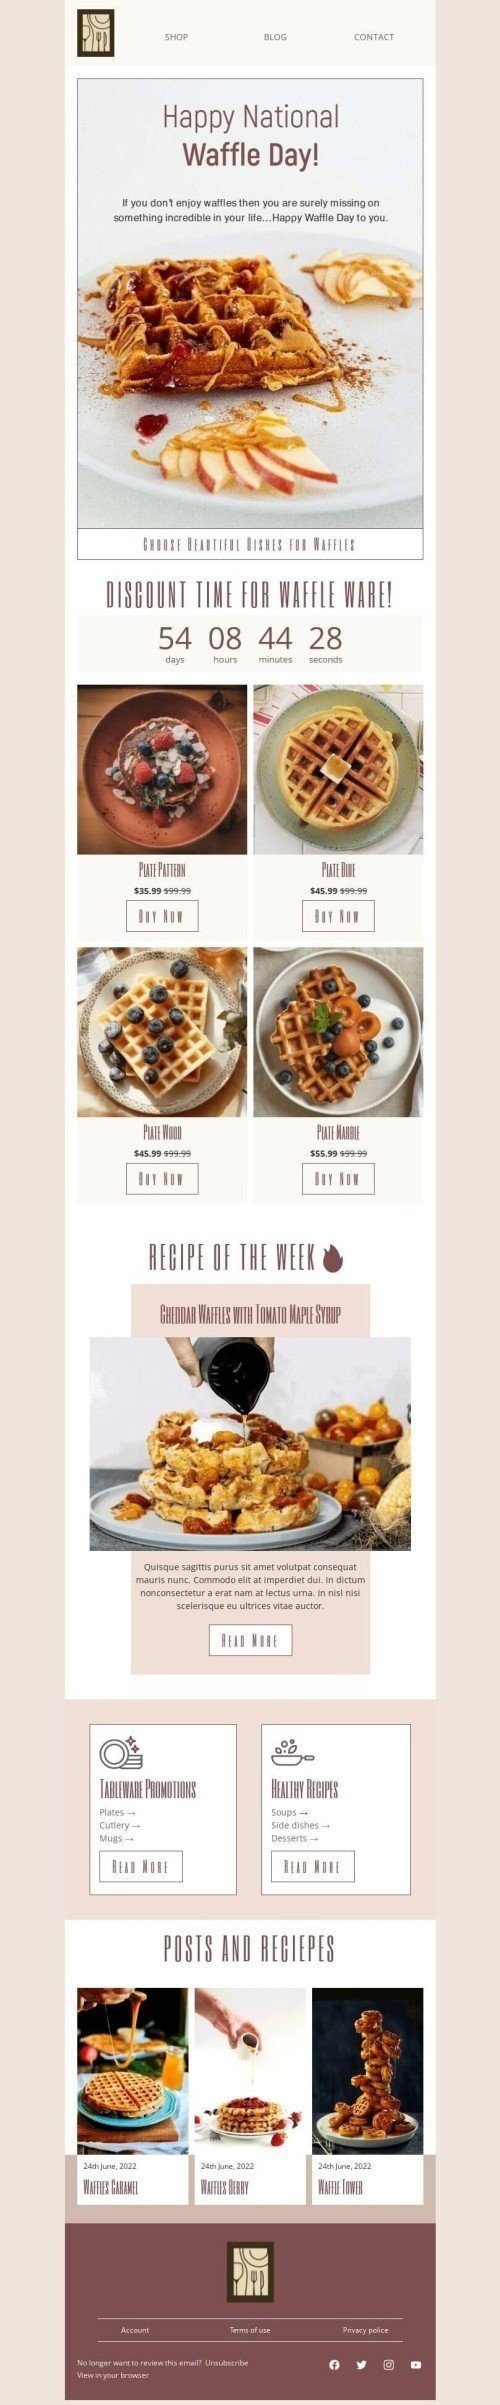 National Waffle Day Email Template "Choose beautiful dishes for waffles" for Furniture, Interior & DIY industry desktop view